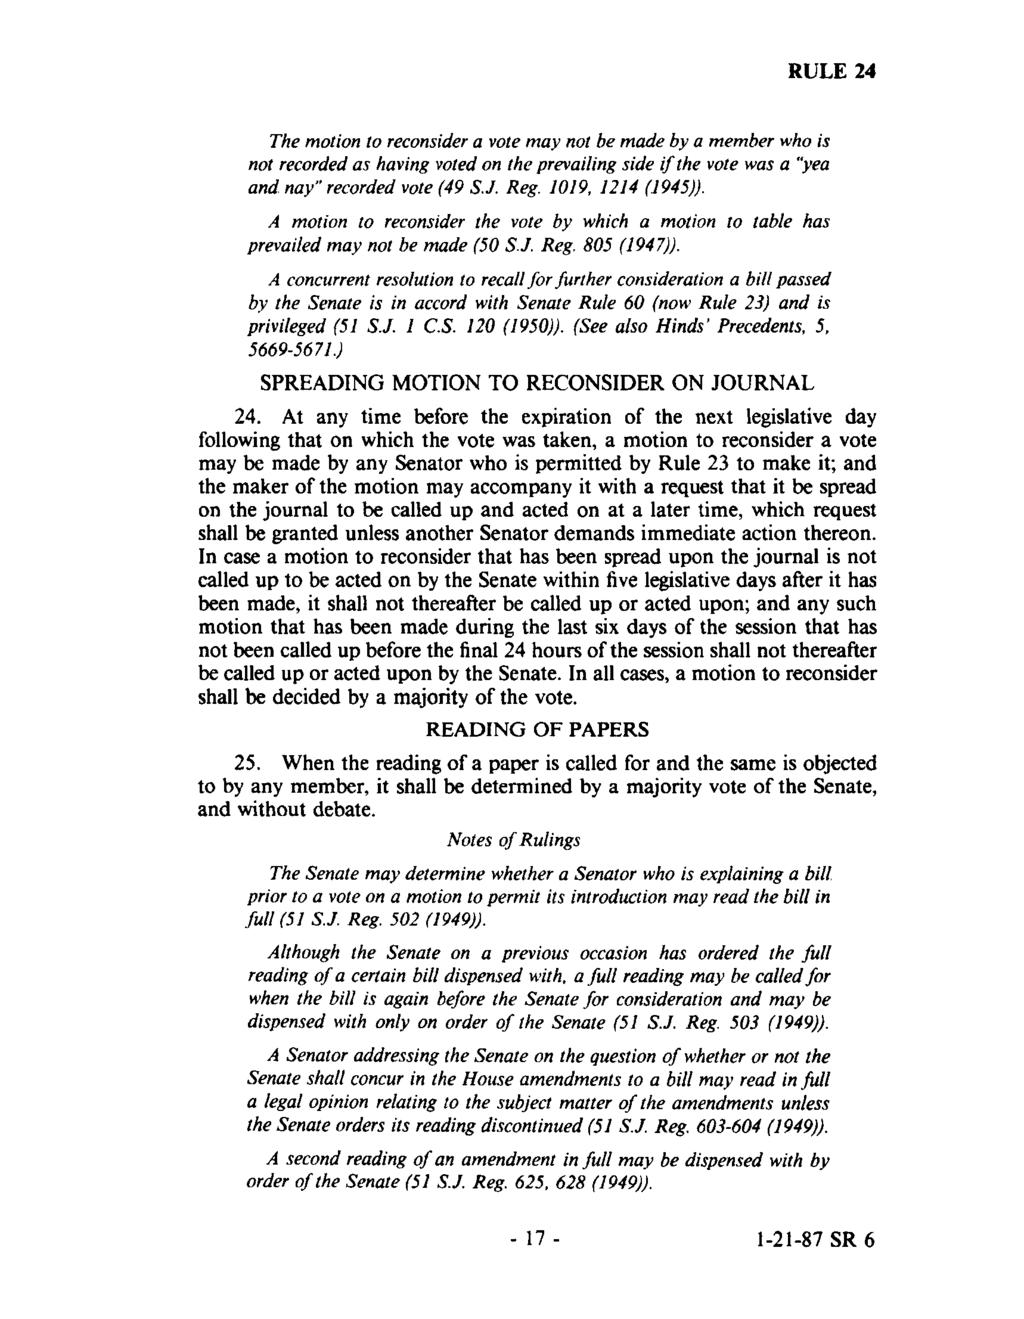 Case 2:13-cv-00193 Document 664-22 Filed in TXSD on 11/11/14 Page 95 of 140 The motion to reconsider a vote may not be made by a member who is not recorded as having voted on the prevailing side if